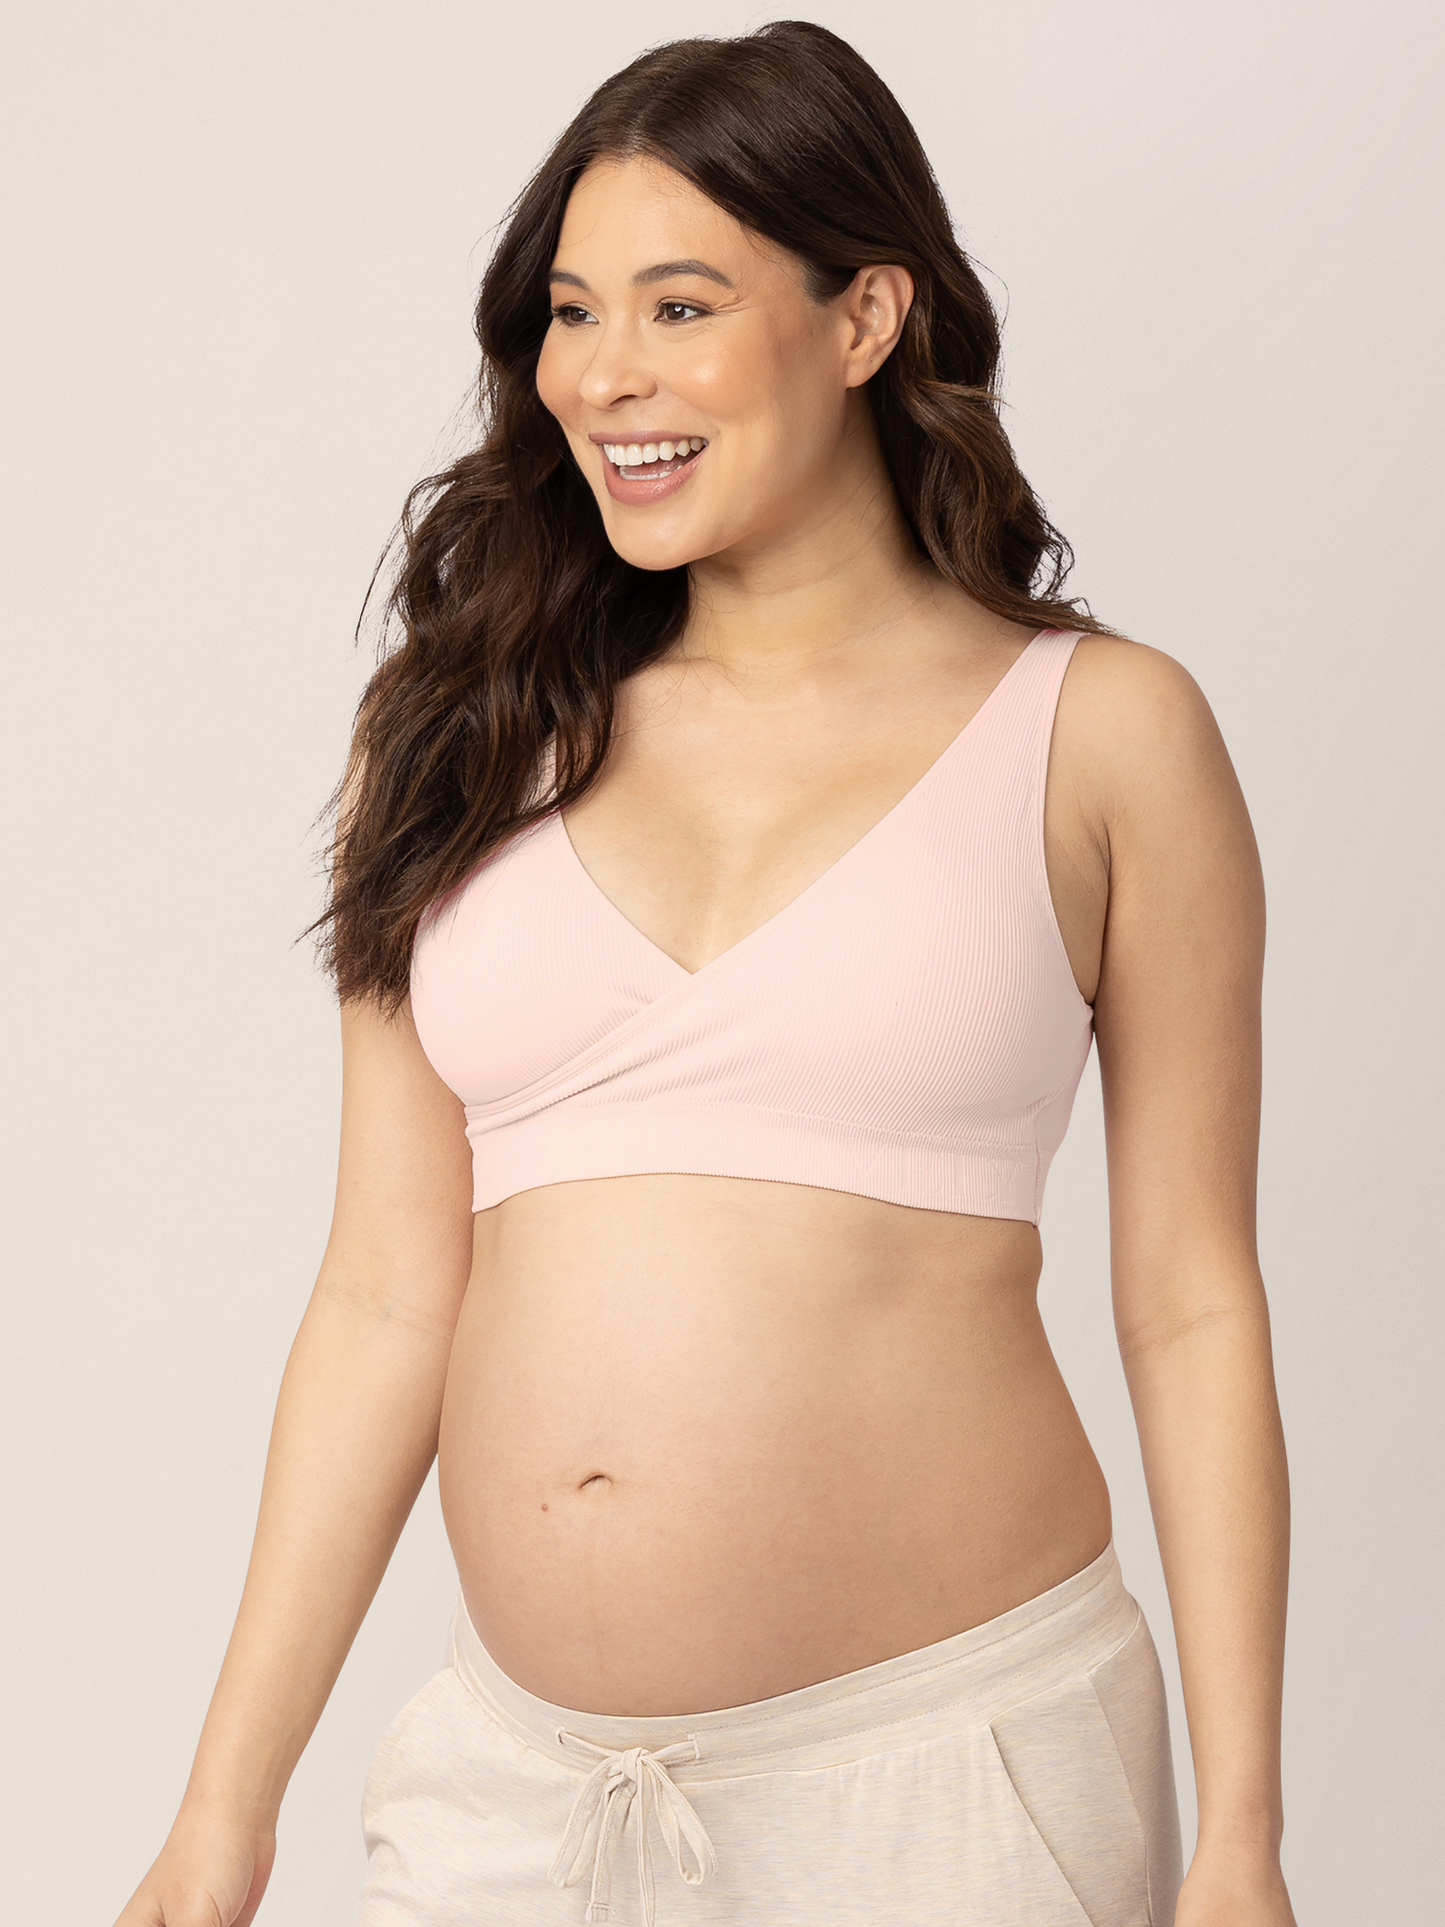 Pregnant model wearing the Sublime® Adjustable Crossover Nursing & Lounge Bra in Soft Pink with her hands at her sides.